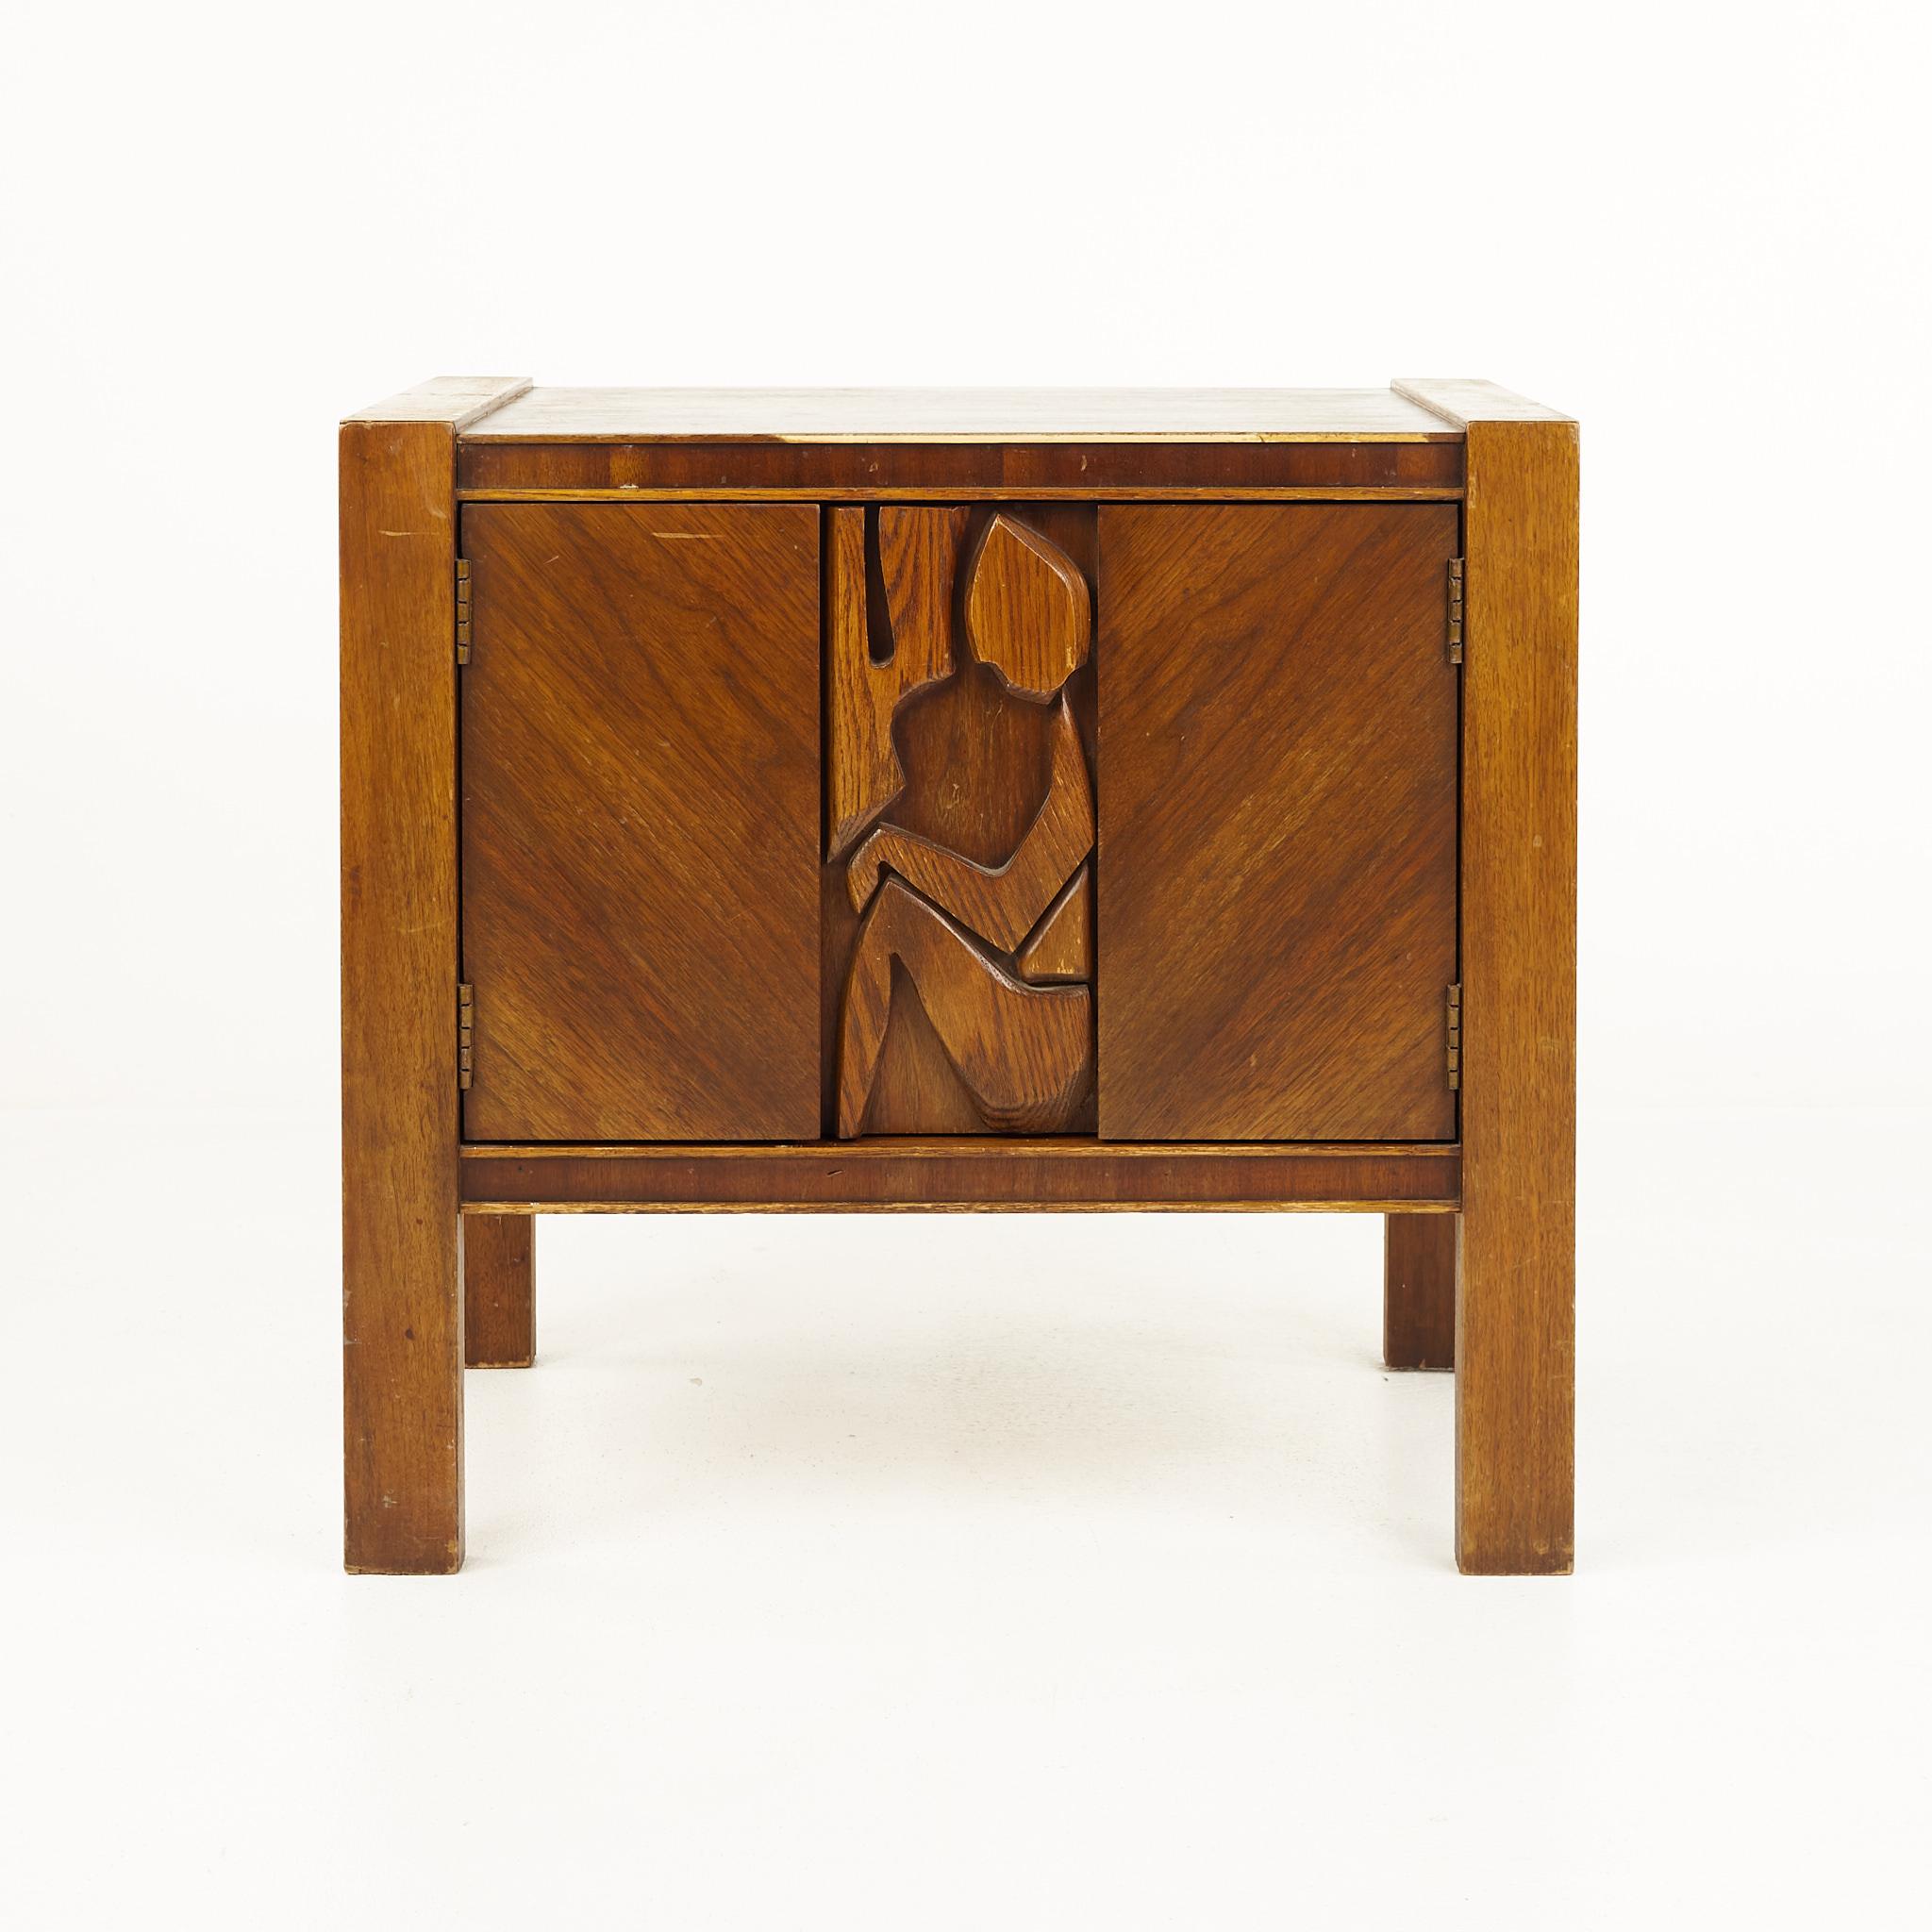 United Furniture mid century brutalist nightstand

This nightstand measures: 27 wide x 17 deep x 25.5 inches high

All pieces of furniture can be had in what we call restored vintage condition. That means the piece is restored upon purchase so